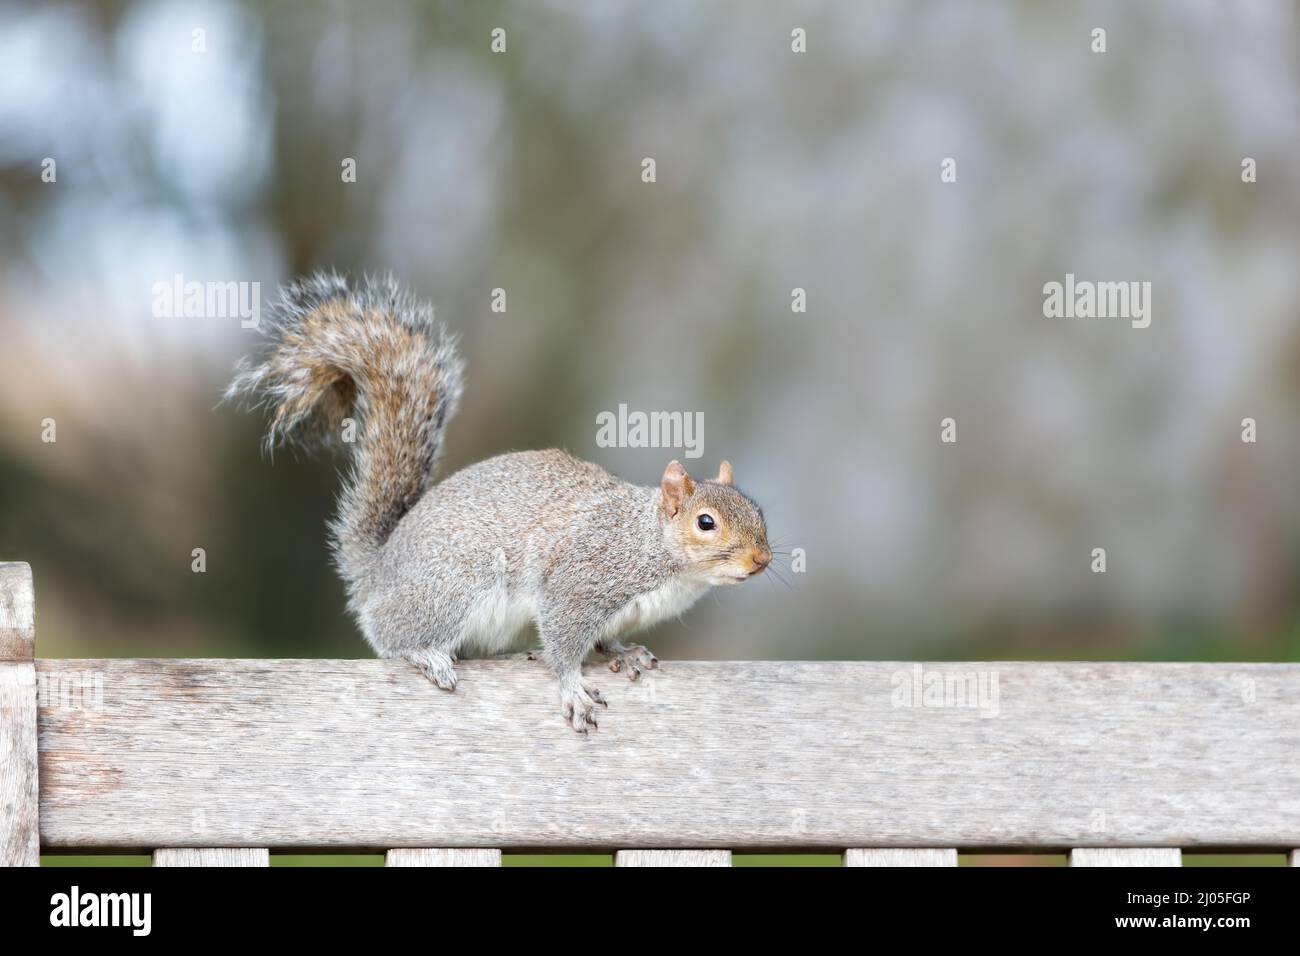 Close up of a grey squirrel sitting on a wooden bench in a park, UK. Stock Photo